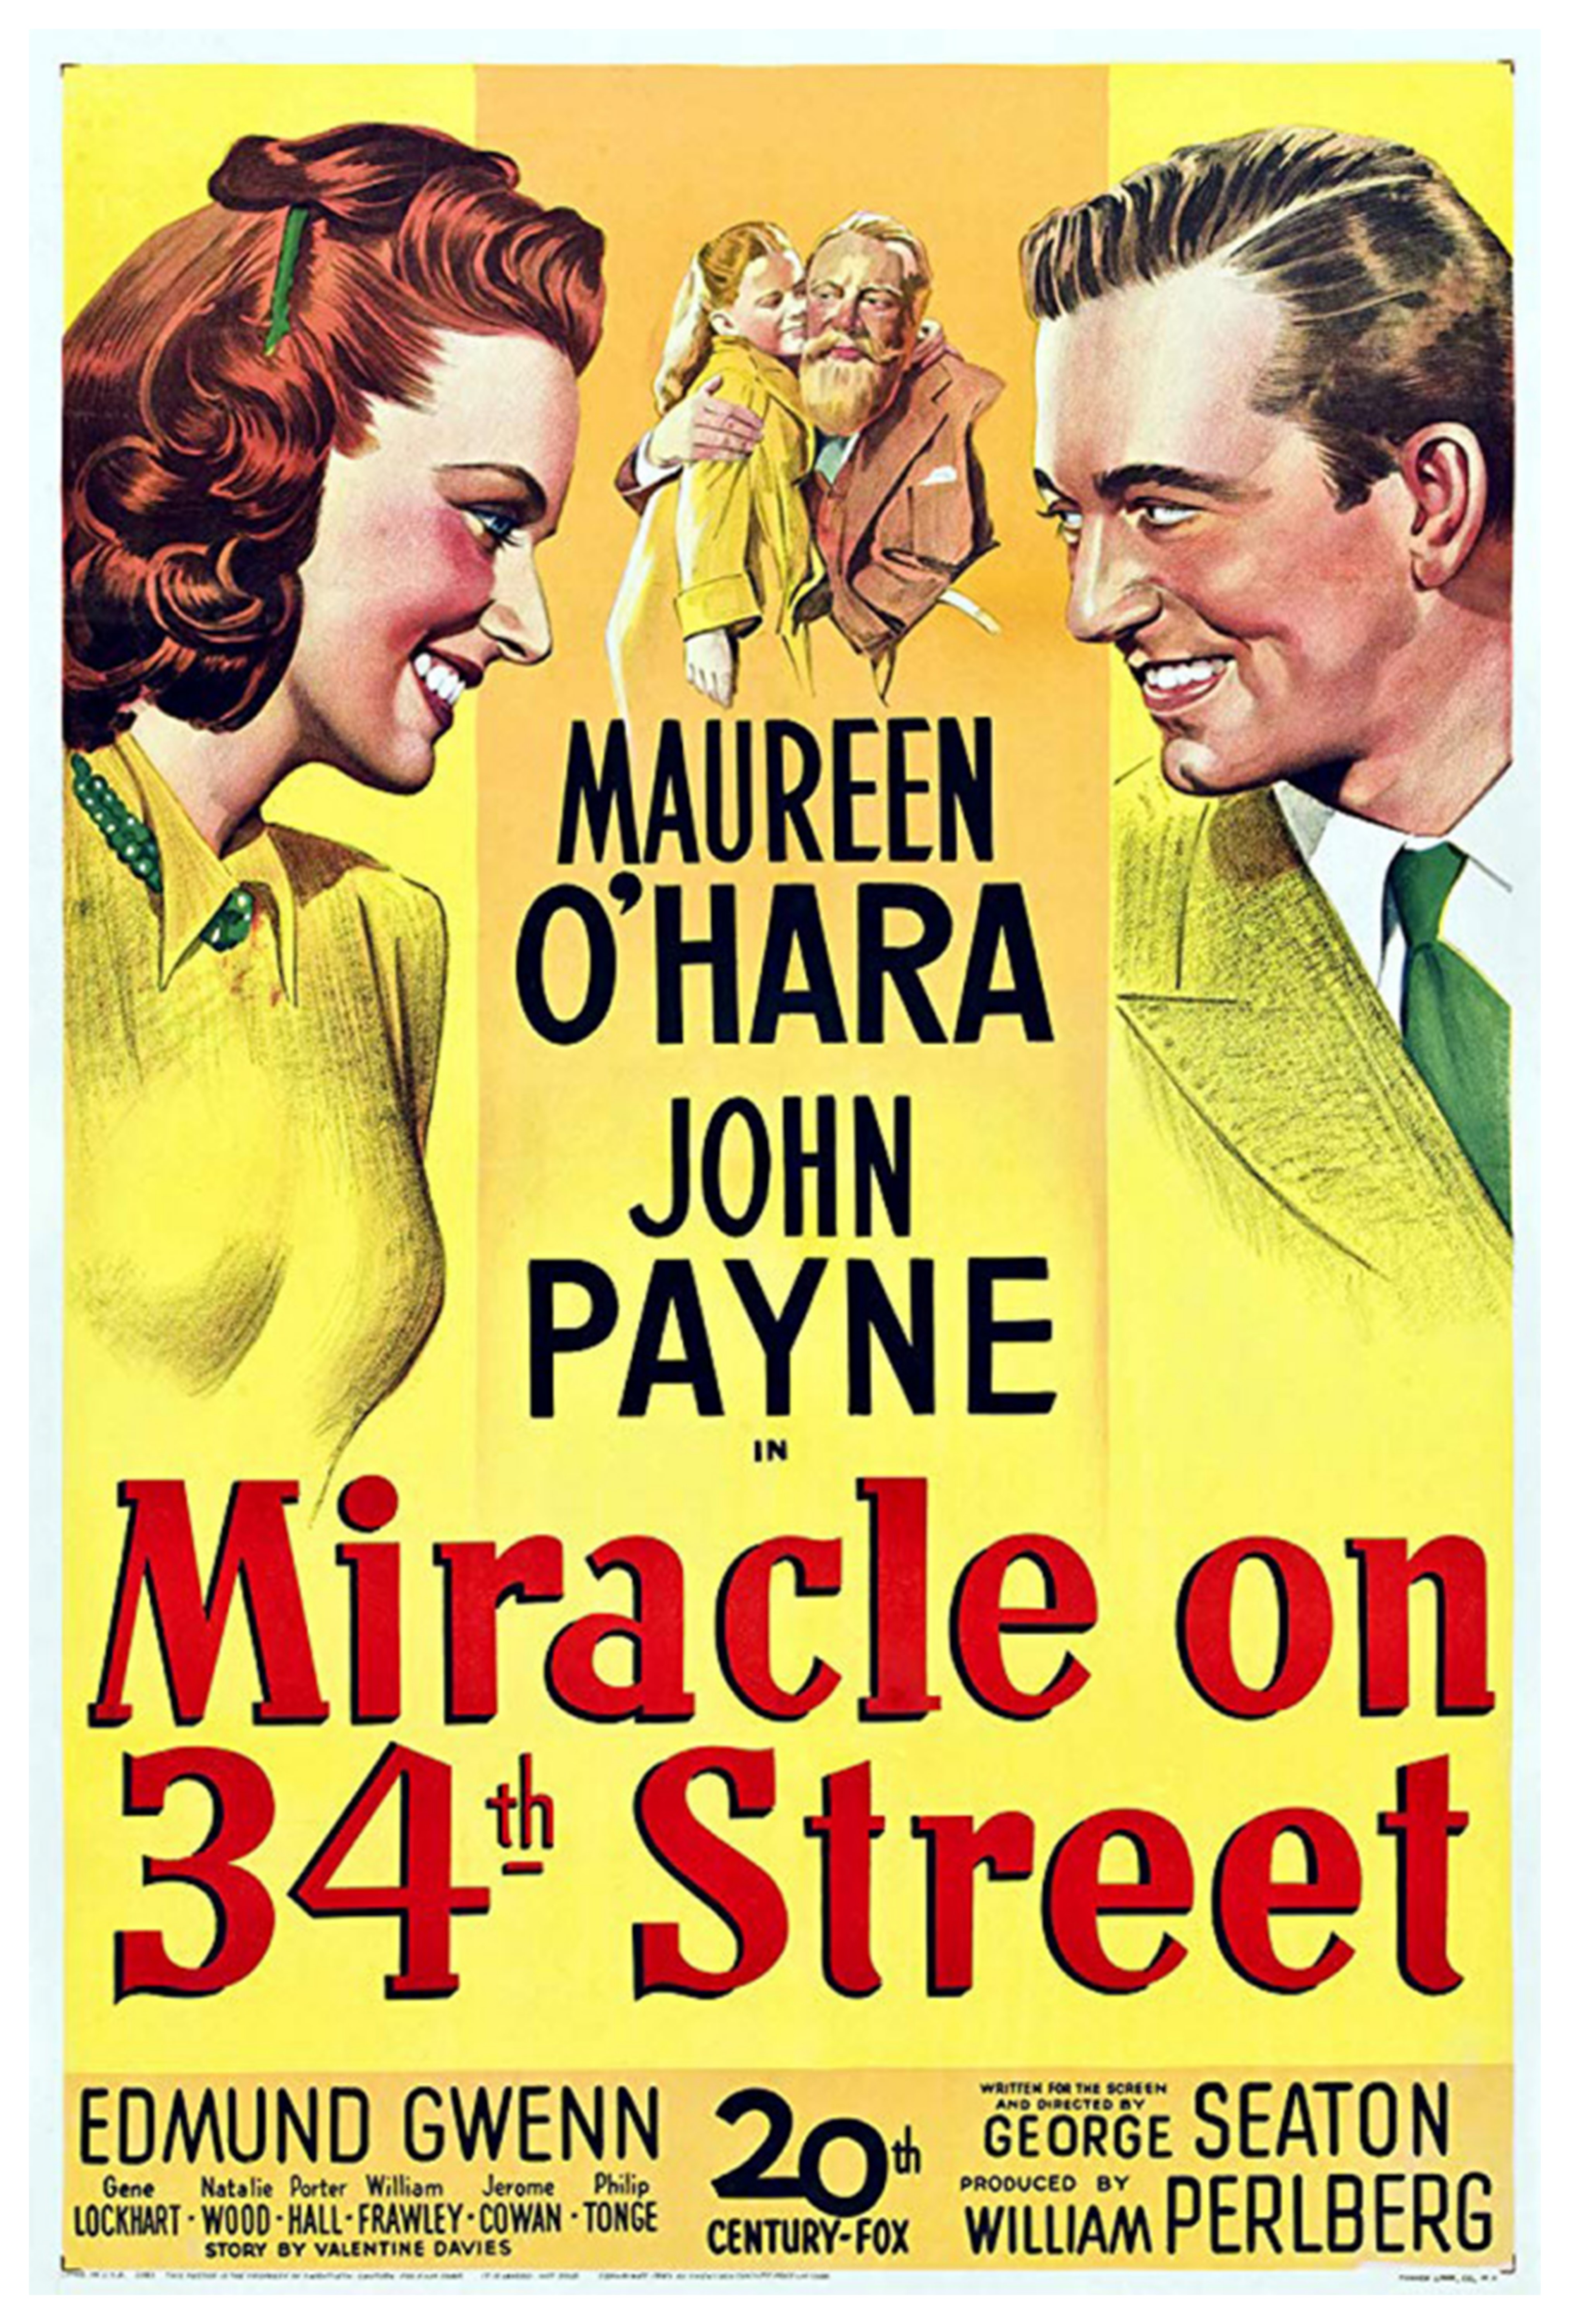 Film poster for Miracle on 34th Street featuring a man and woman staring into each other's eyes with Santa Claus and a little girl in the background on a yellow background with red and black lettering.